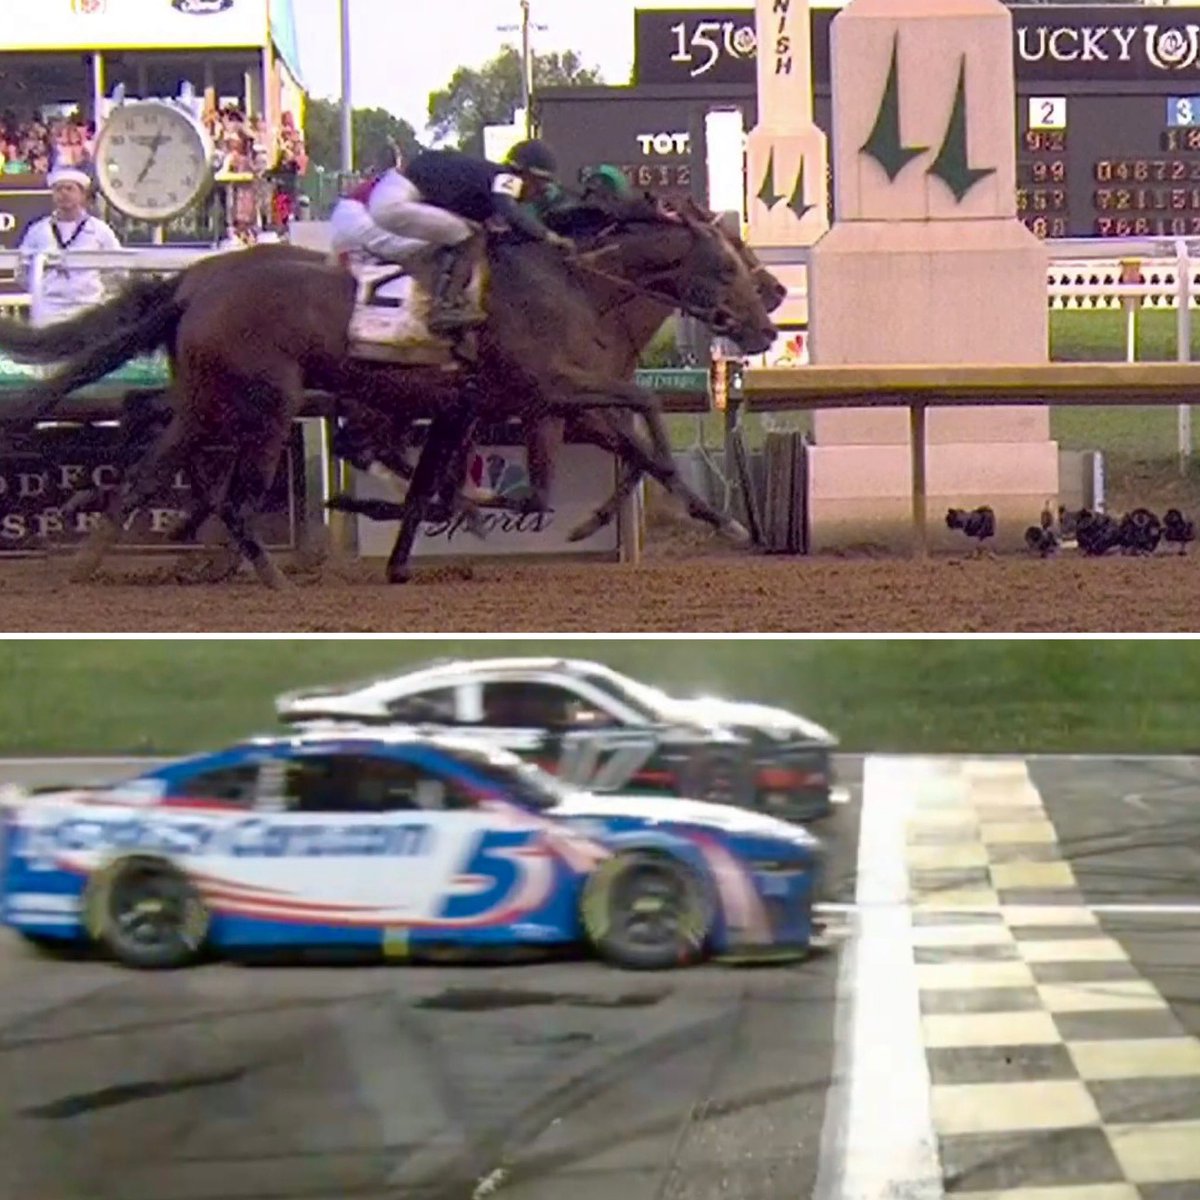 TWO PHOTO FINISHES IN ONE WEEKEND. Saturday: Mystik Dan wins the Kentucky Derby by a nose. Sunday: Kyle Larson wins in the closest finish in NASCAR Cup Series history.